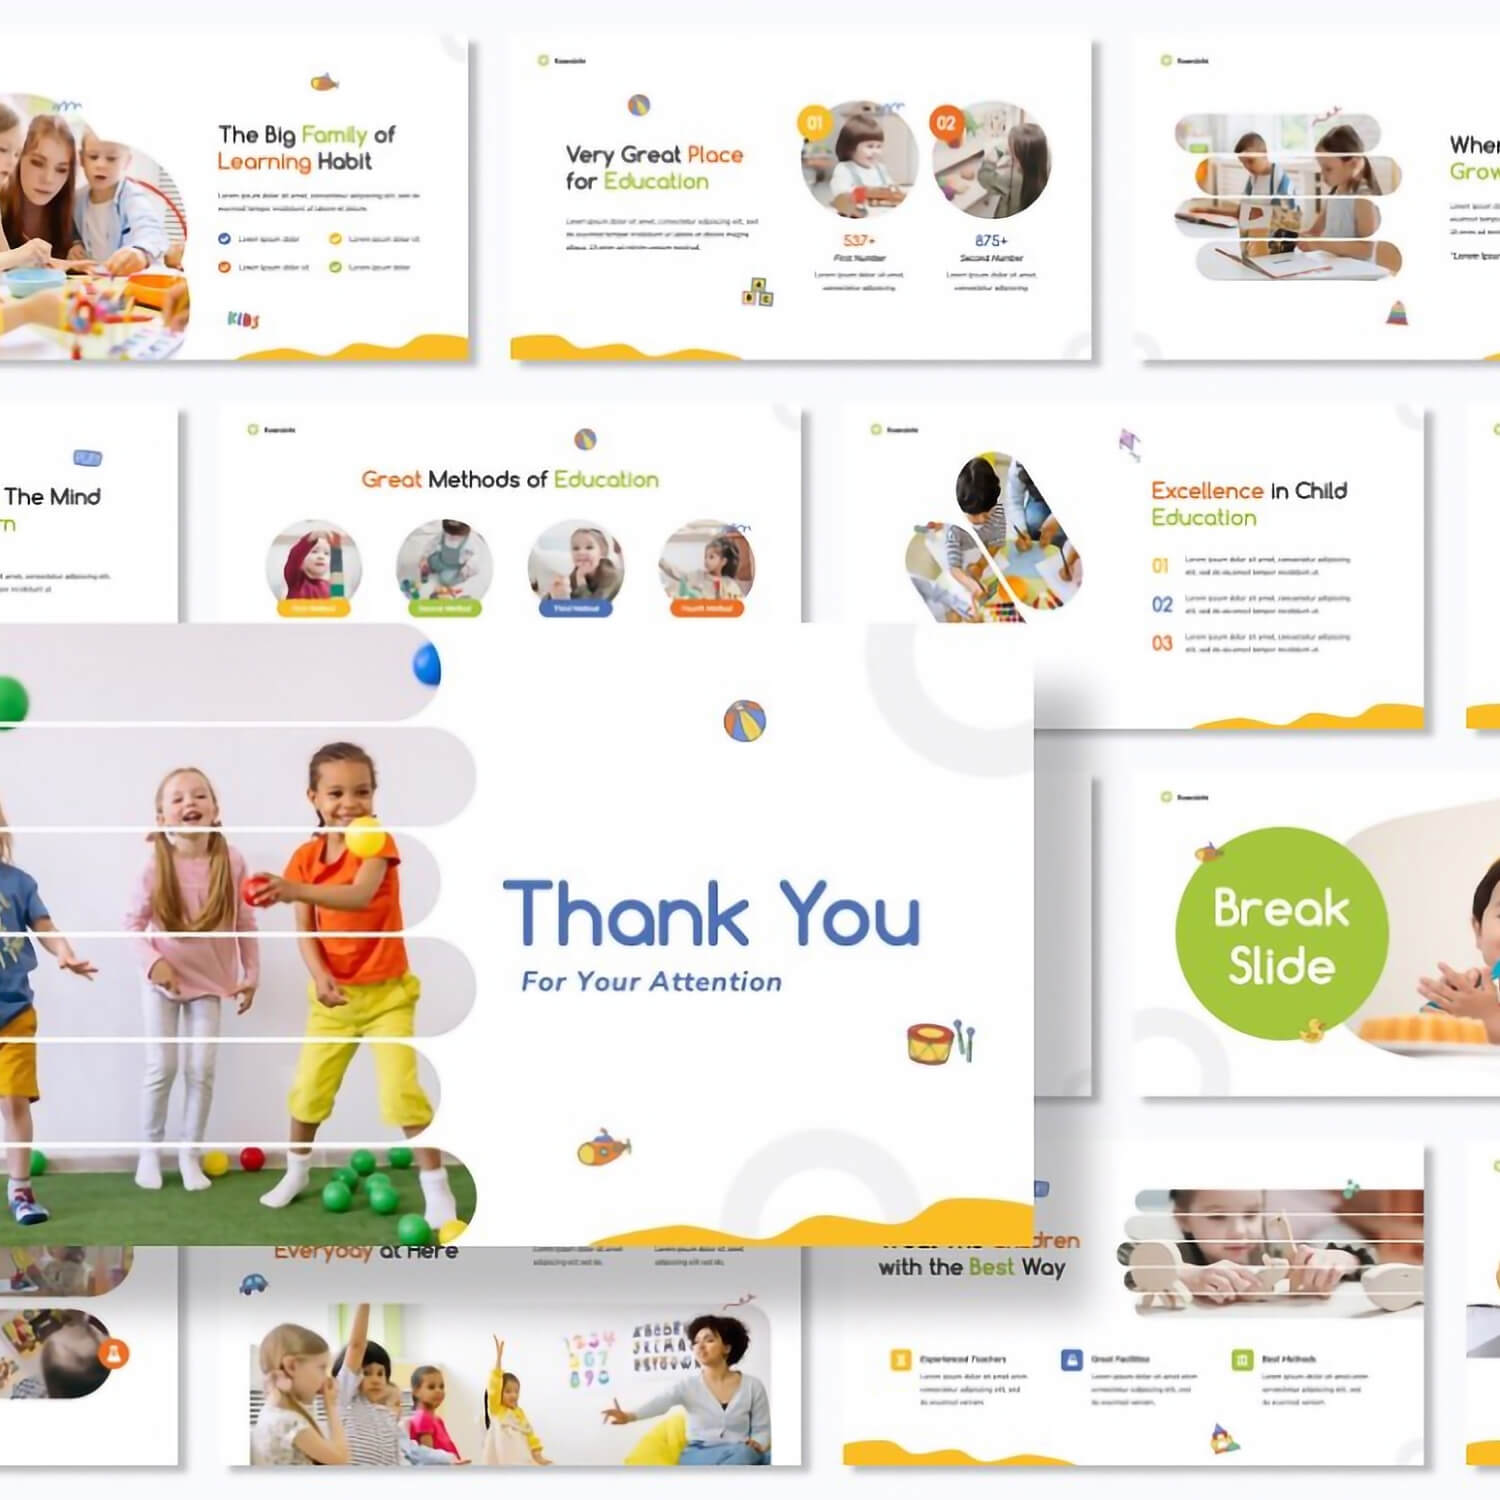 Kindergarten Powerpoint presentation with titles "The Big Family of Learning Habit", "Very Great Place for Education".